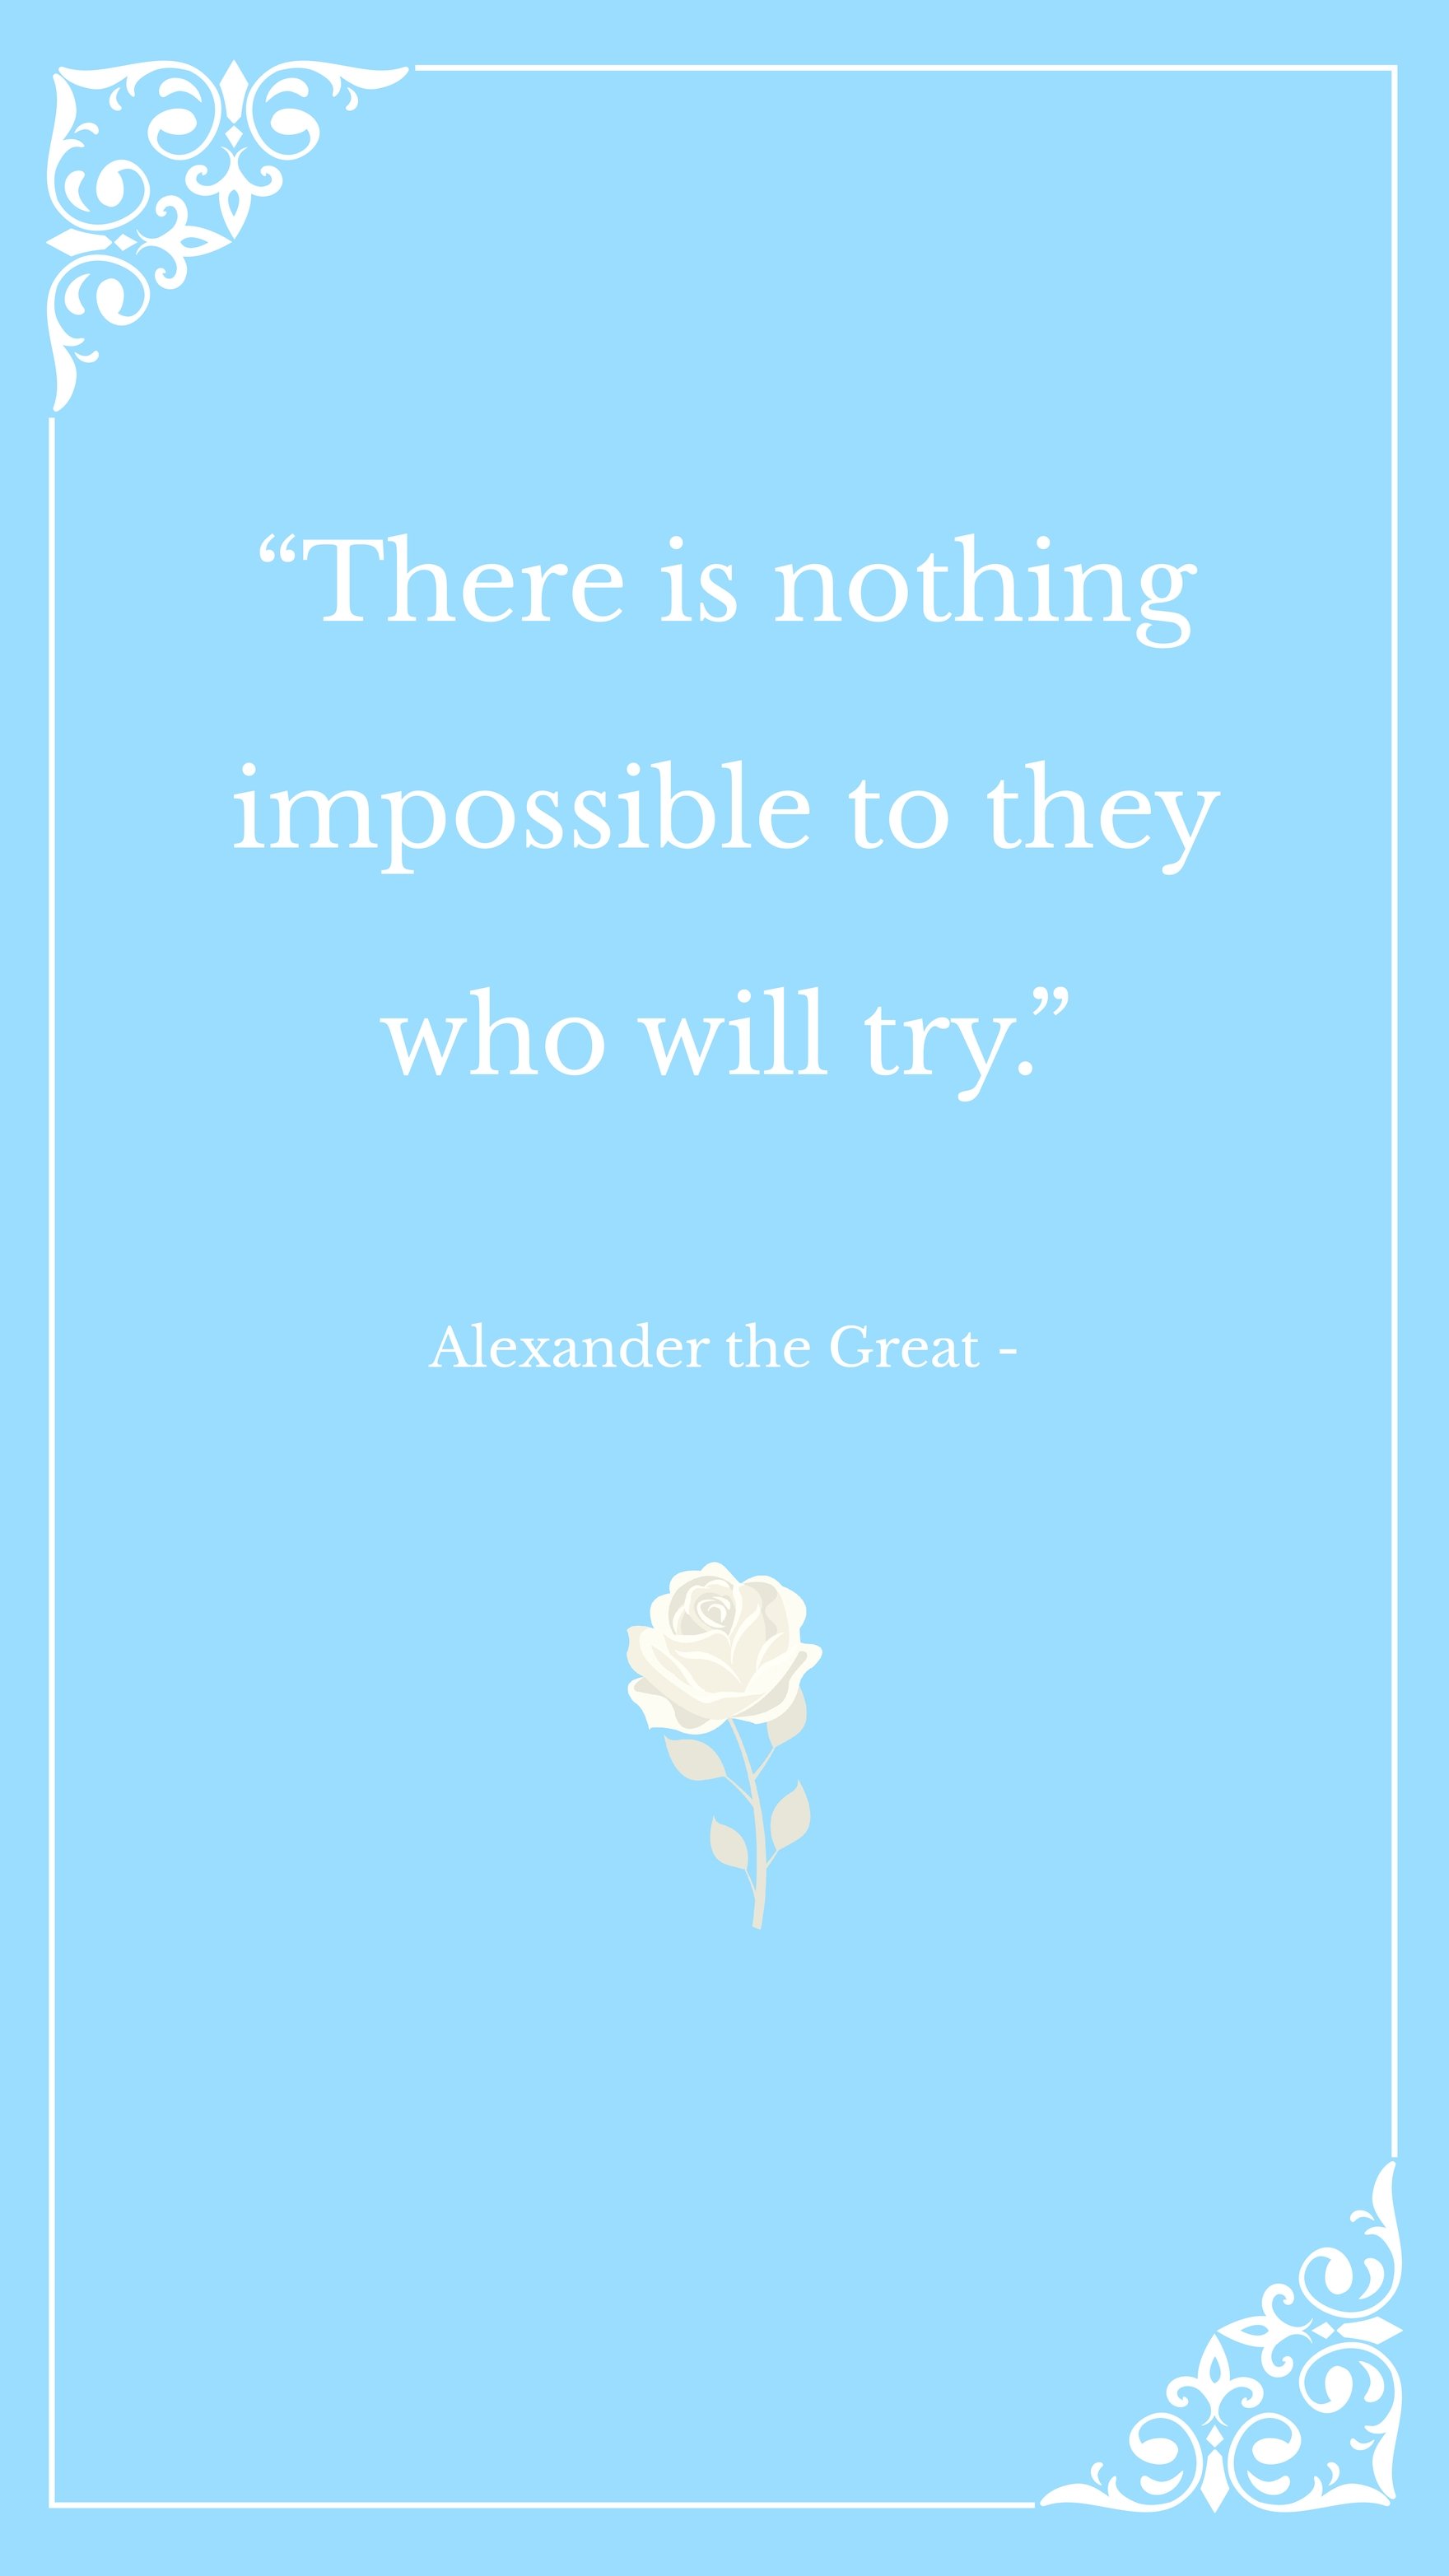 Free Alexander the Great - There is nothing impossible to they who will try. in JPG